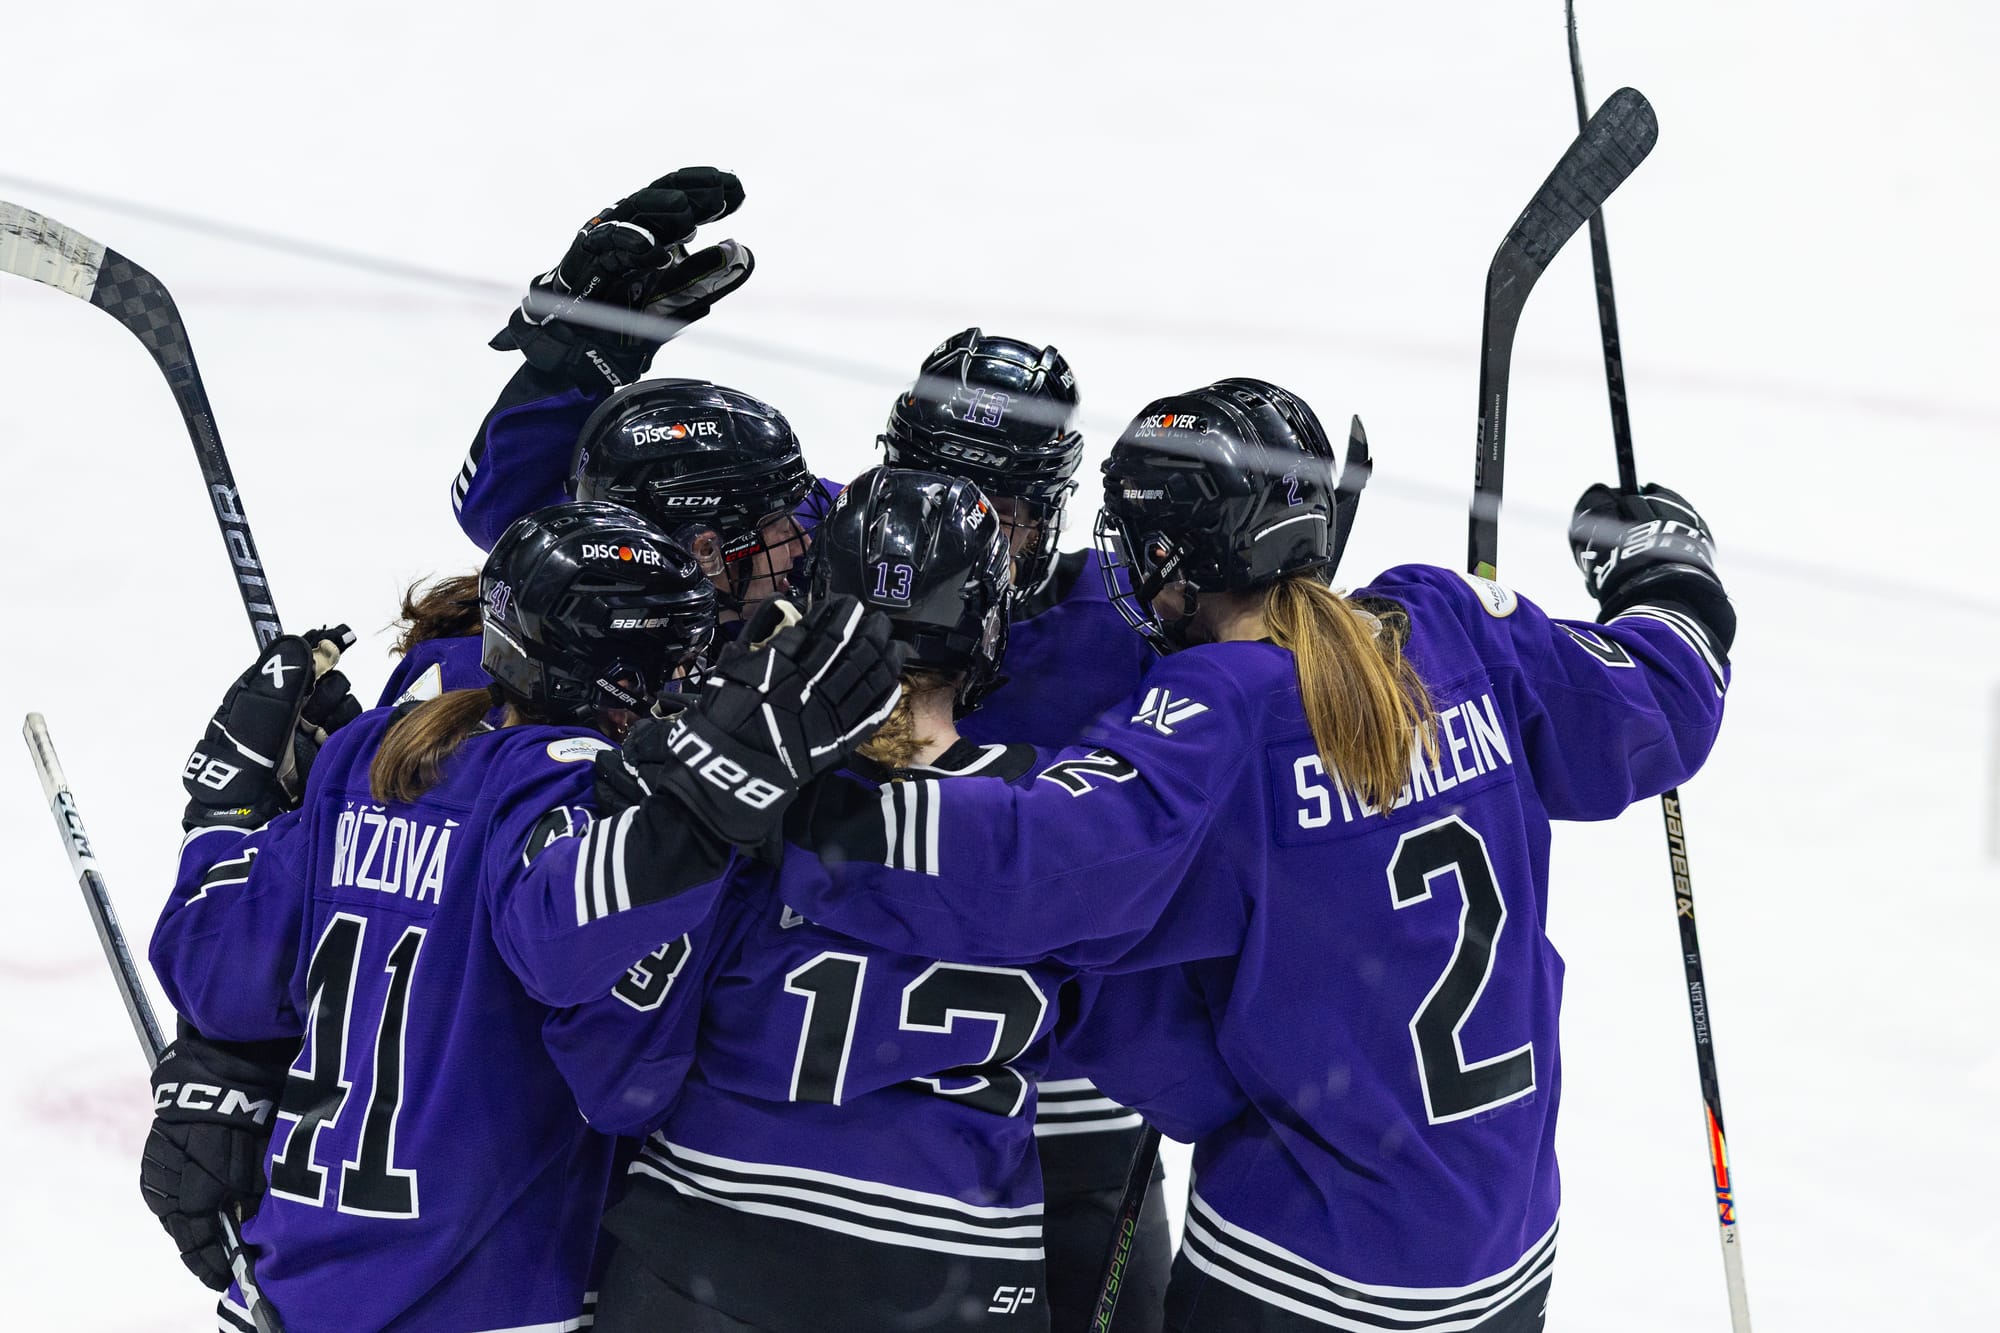 Minnesota players celebrate a goal against Boston. There are five of them in a big group hug. They are all wearing purple home uniforms.